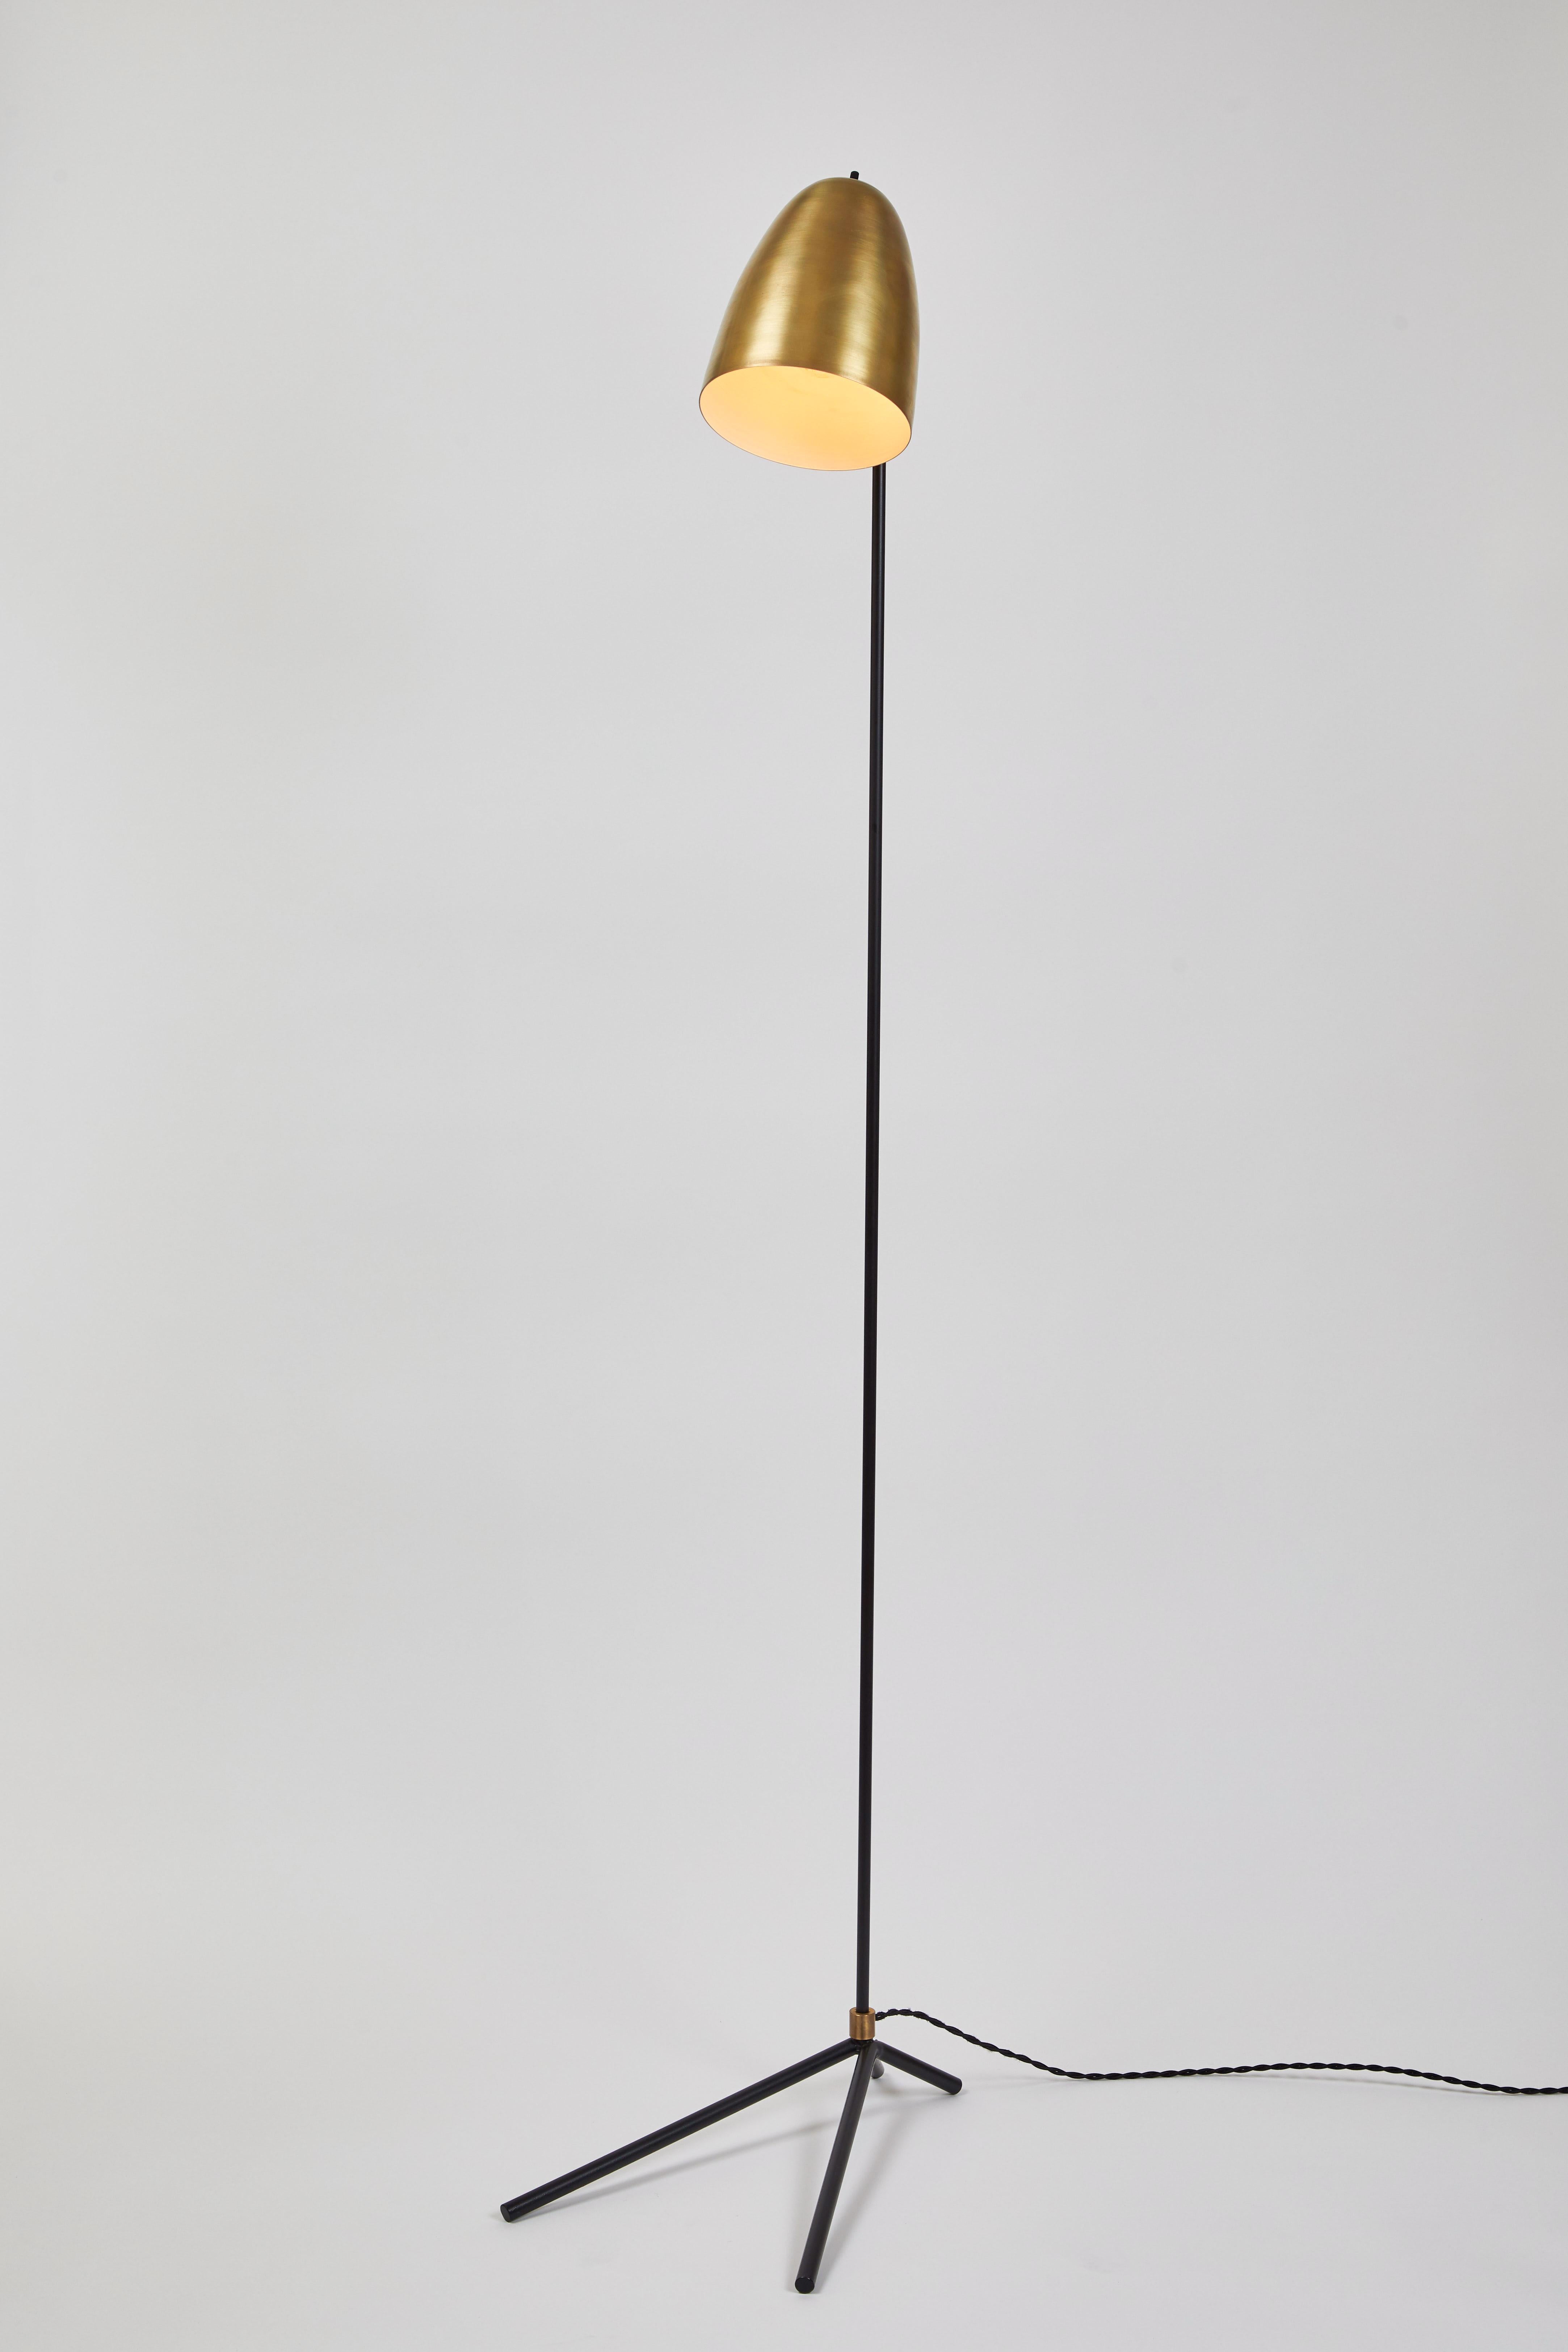 'ORO' brass and metal floor lamp. 

Hand-fabricated by Los Angeles based designer and lighting professional Alvaro Benitez, this highly refined floor lamp is reminiscent of the iconic midcentury Italian designs of Arteluce and Stilnovo. Executed in